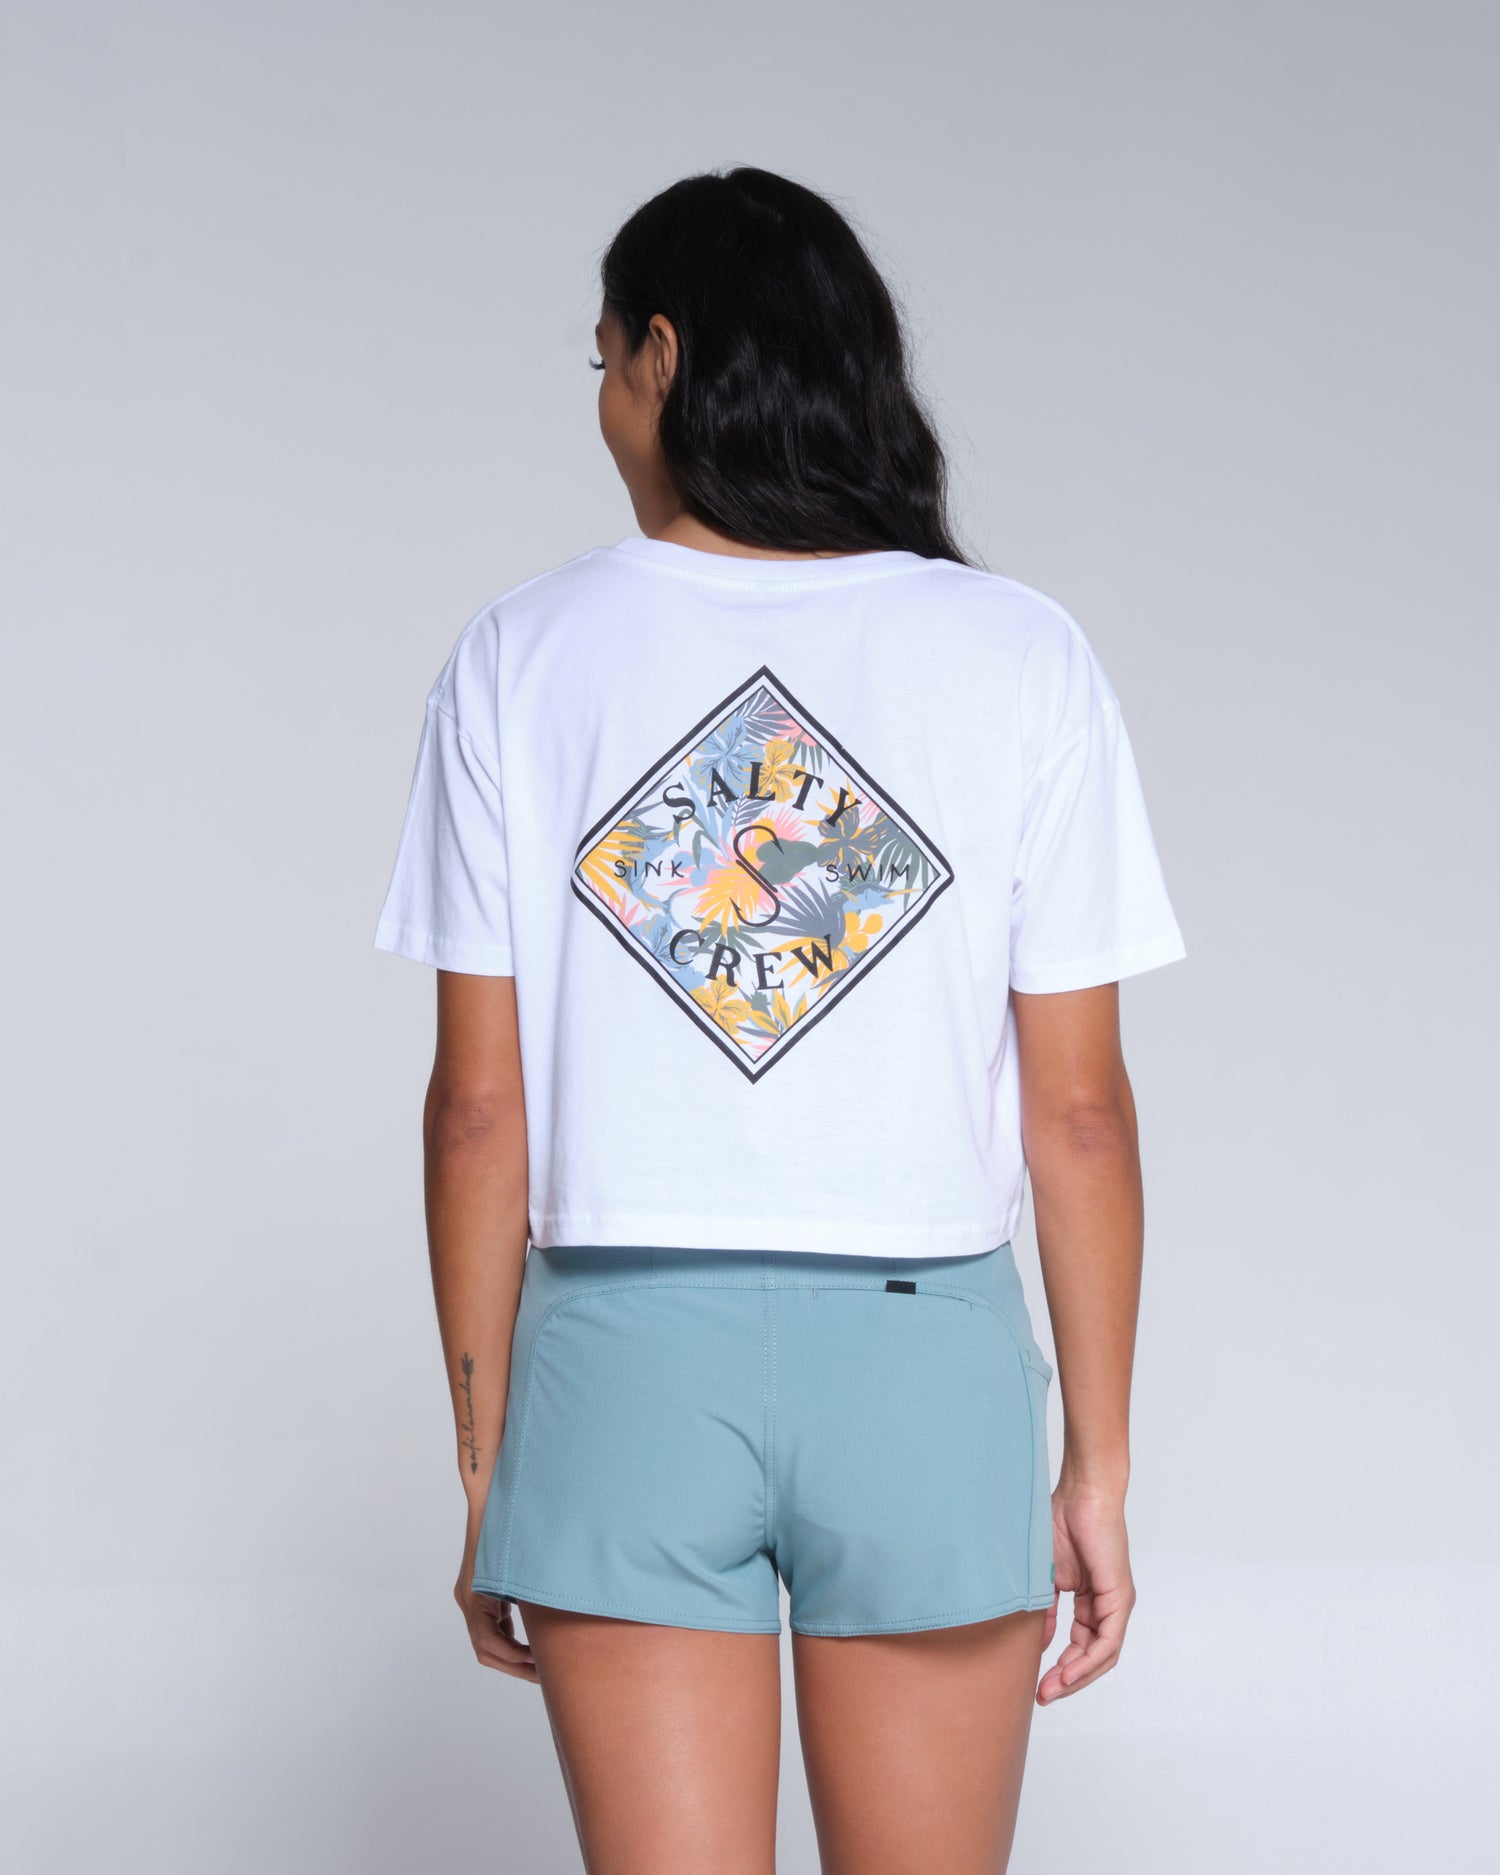 On body back of the Tippet Tropic White Crop Tee